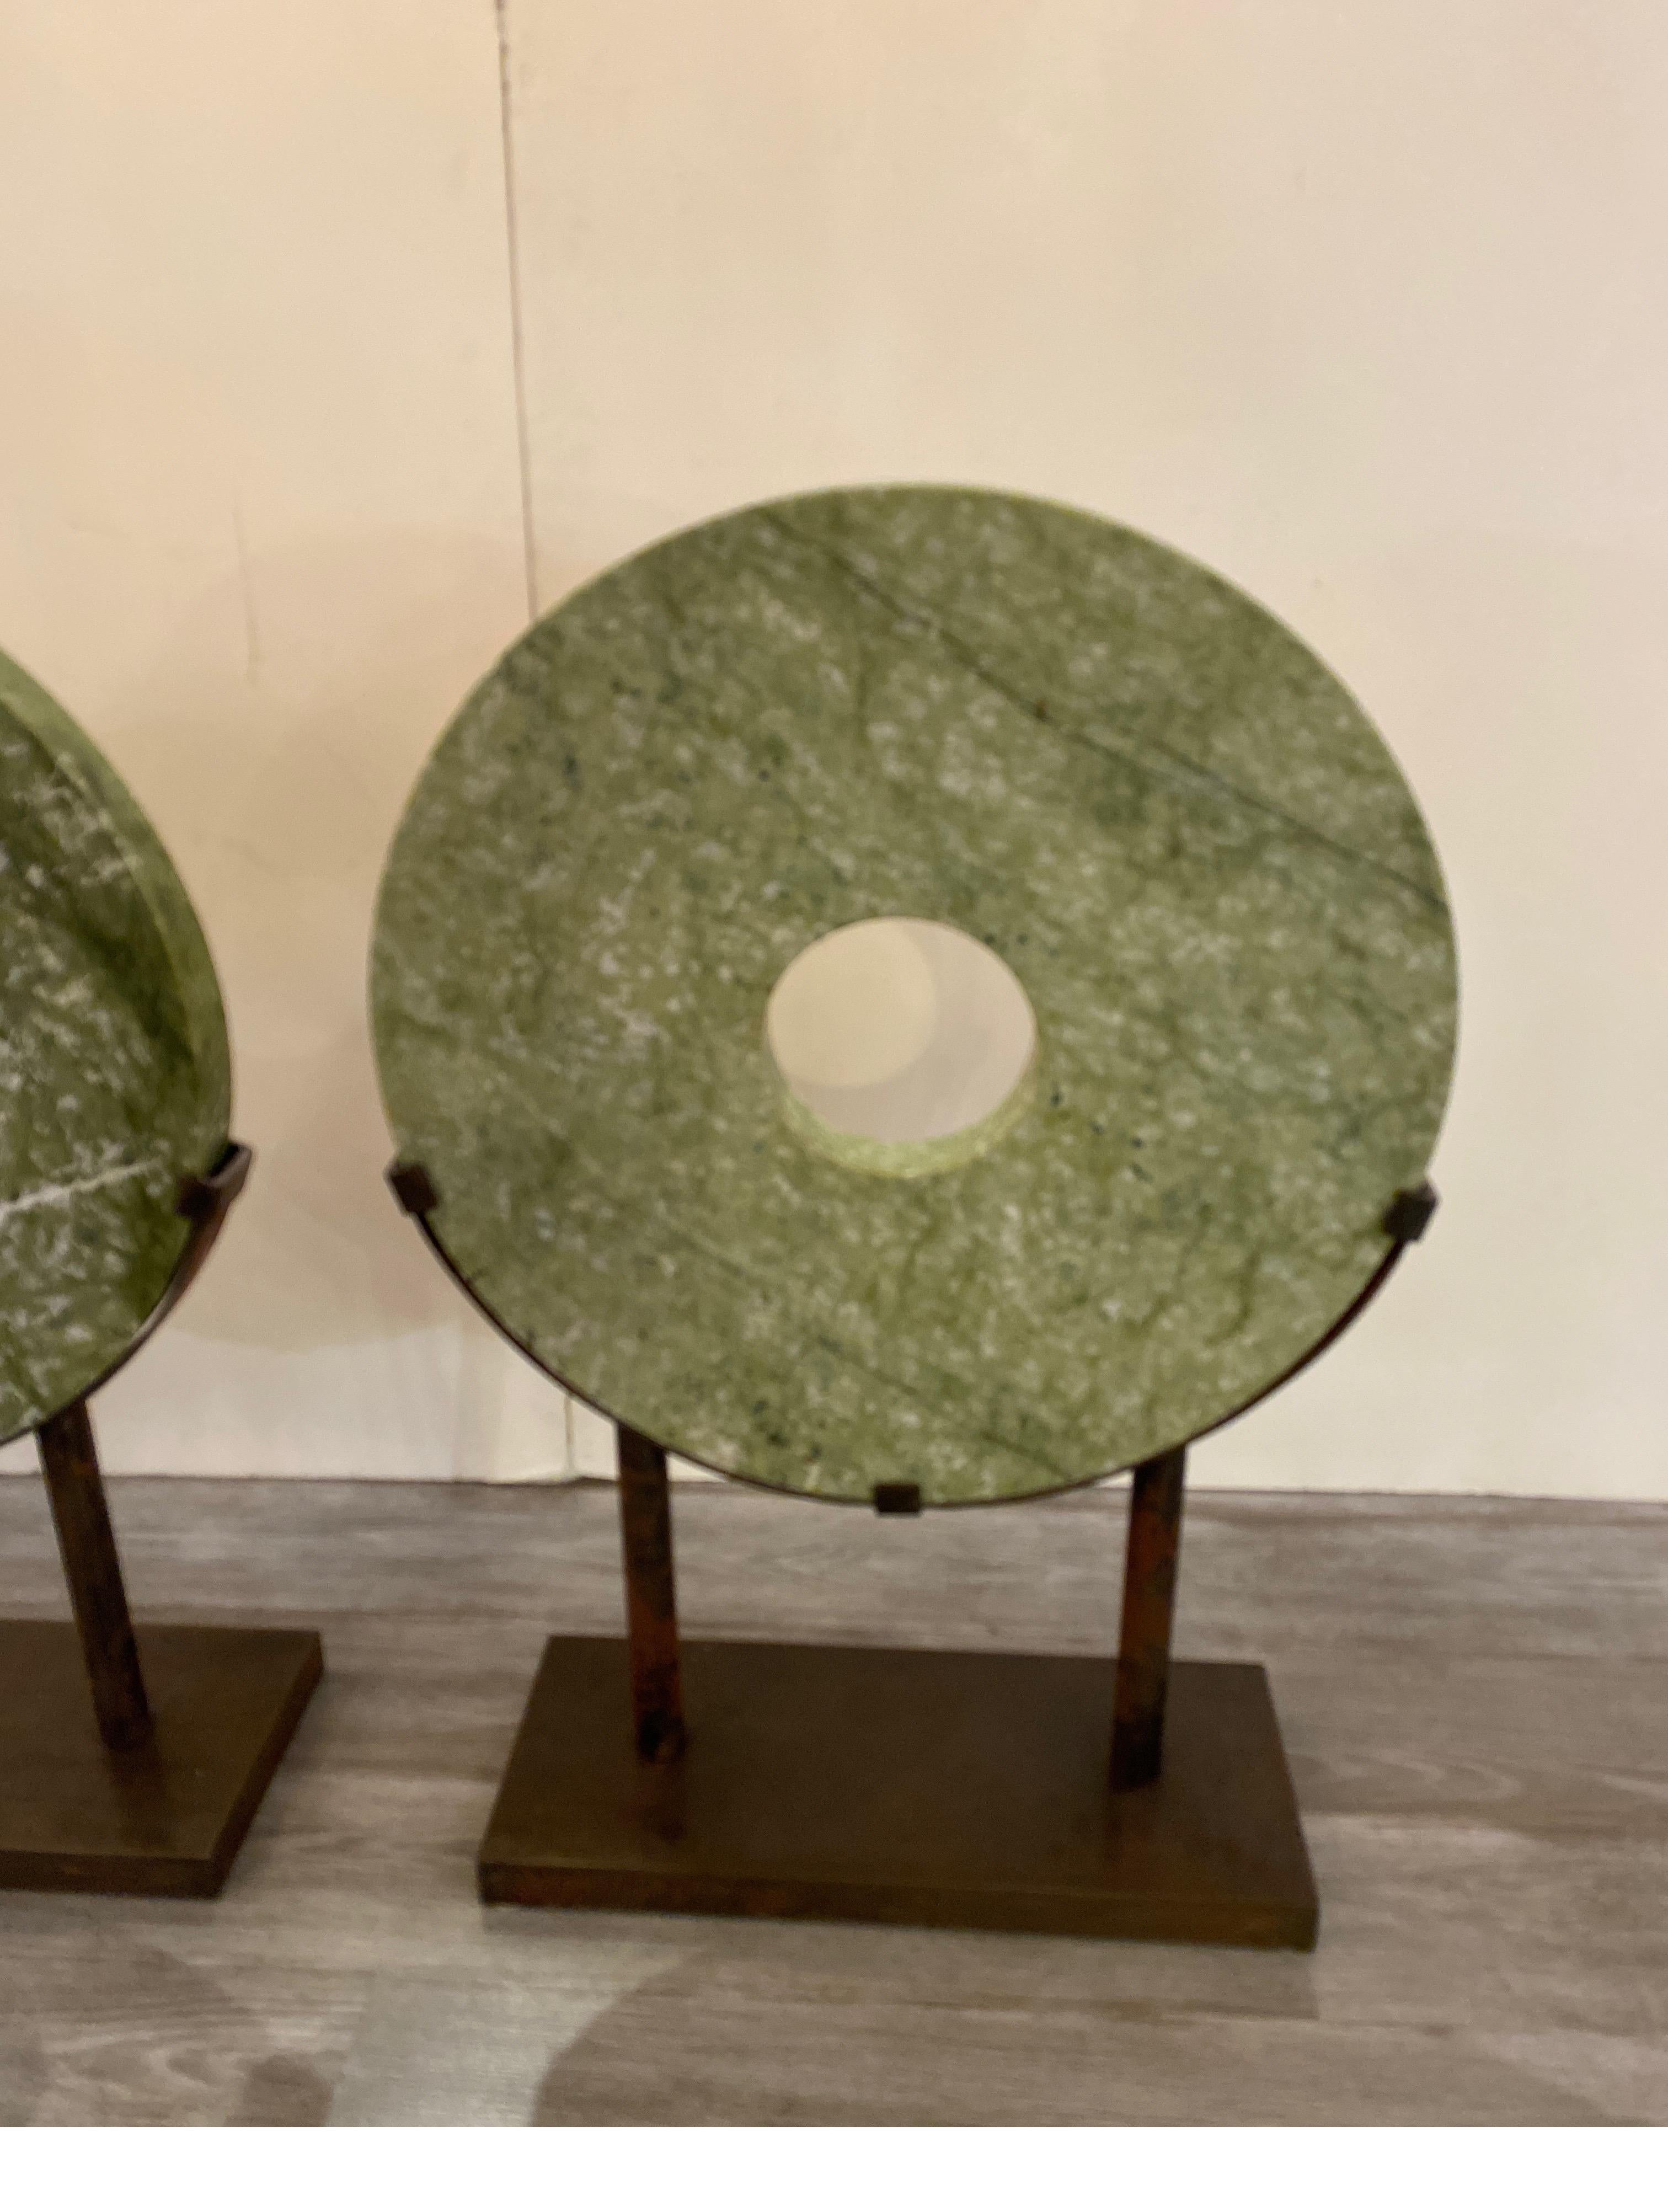 A pair of large round hardstone or marble Chinese sculptures with custom aged steel bases. the stone circles are 24 dimeter and 1.05 inches deep, total measurement is 34.5 high, 24 wide 8 deep with the steel stands. These are solid and heavy and